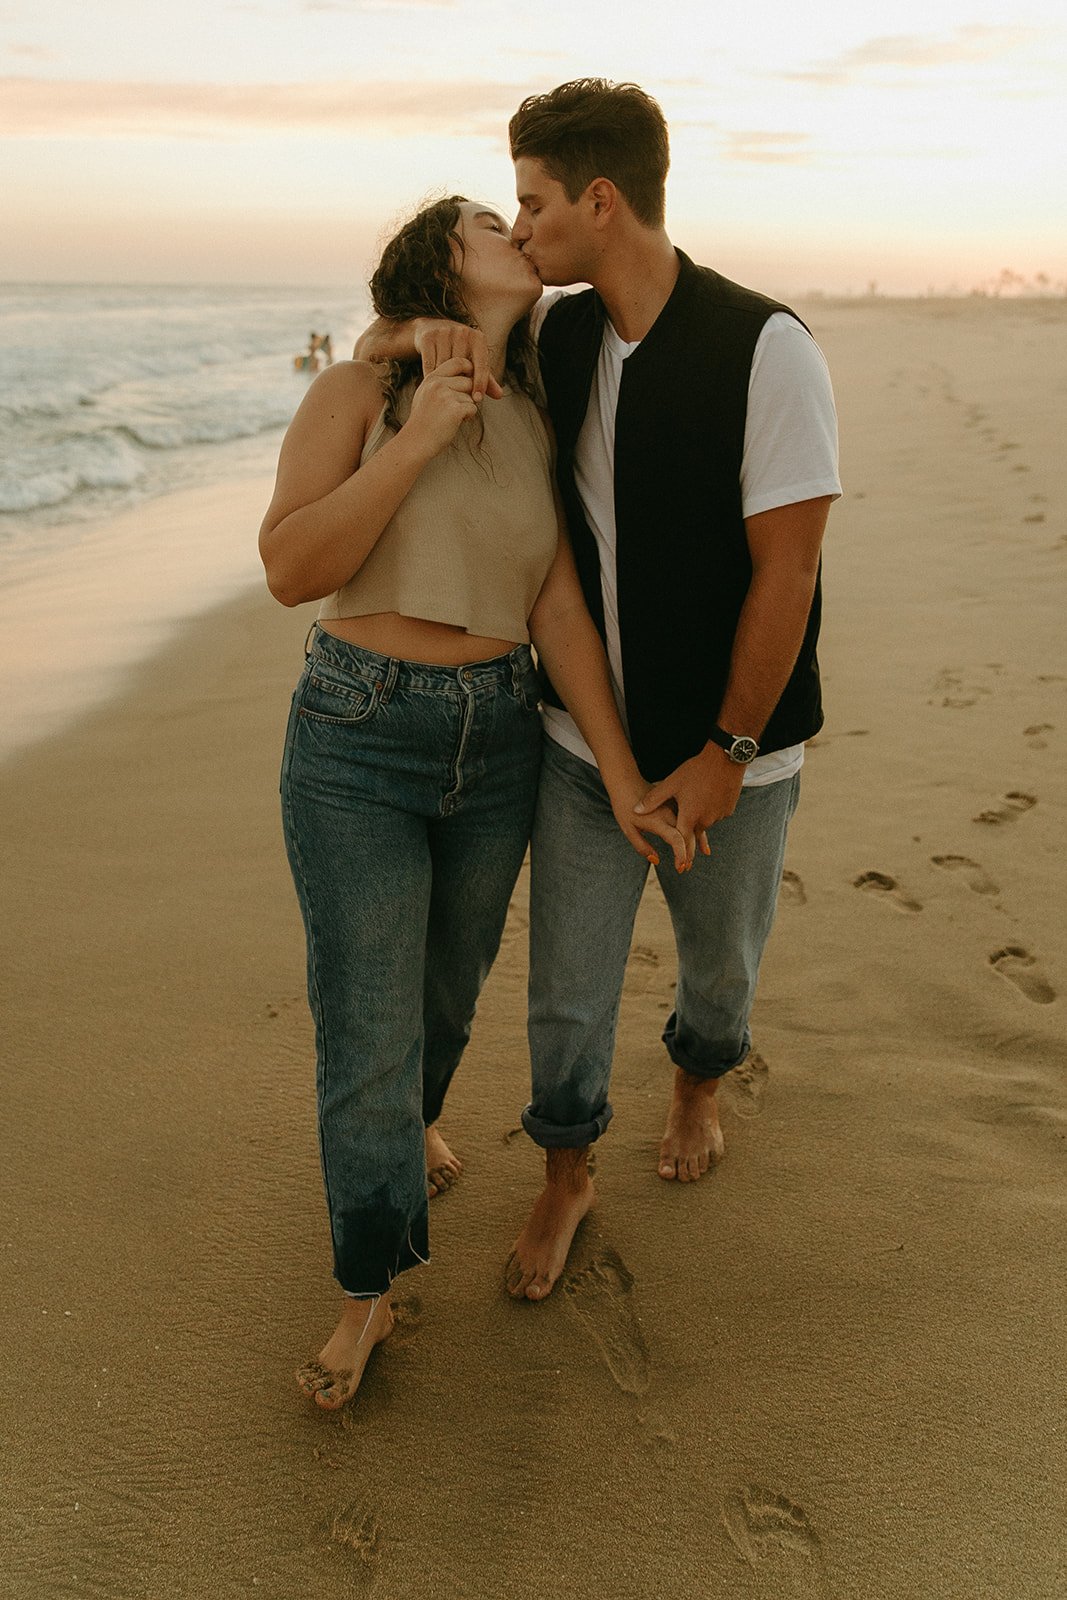 Newport Beach Engagement photo session walking and kissing on the beach during sunset